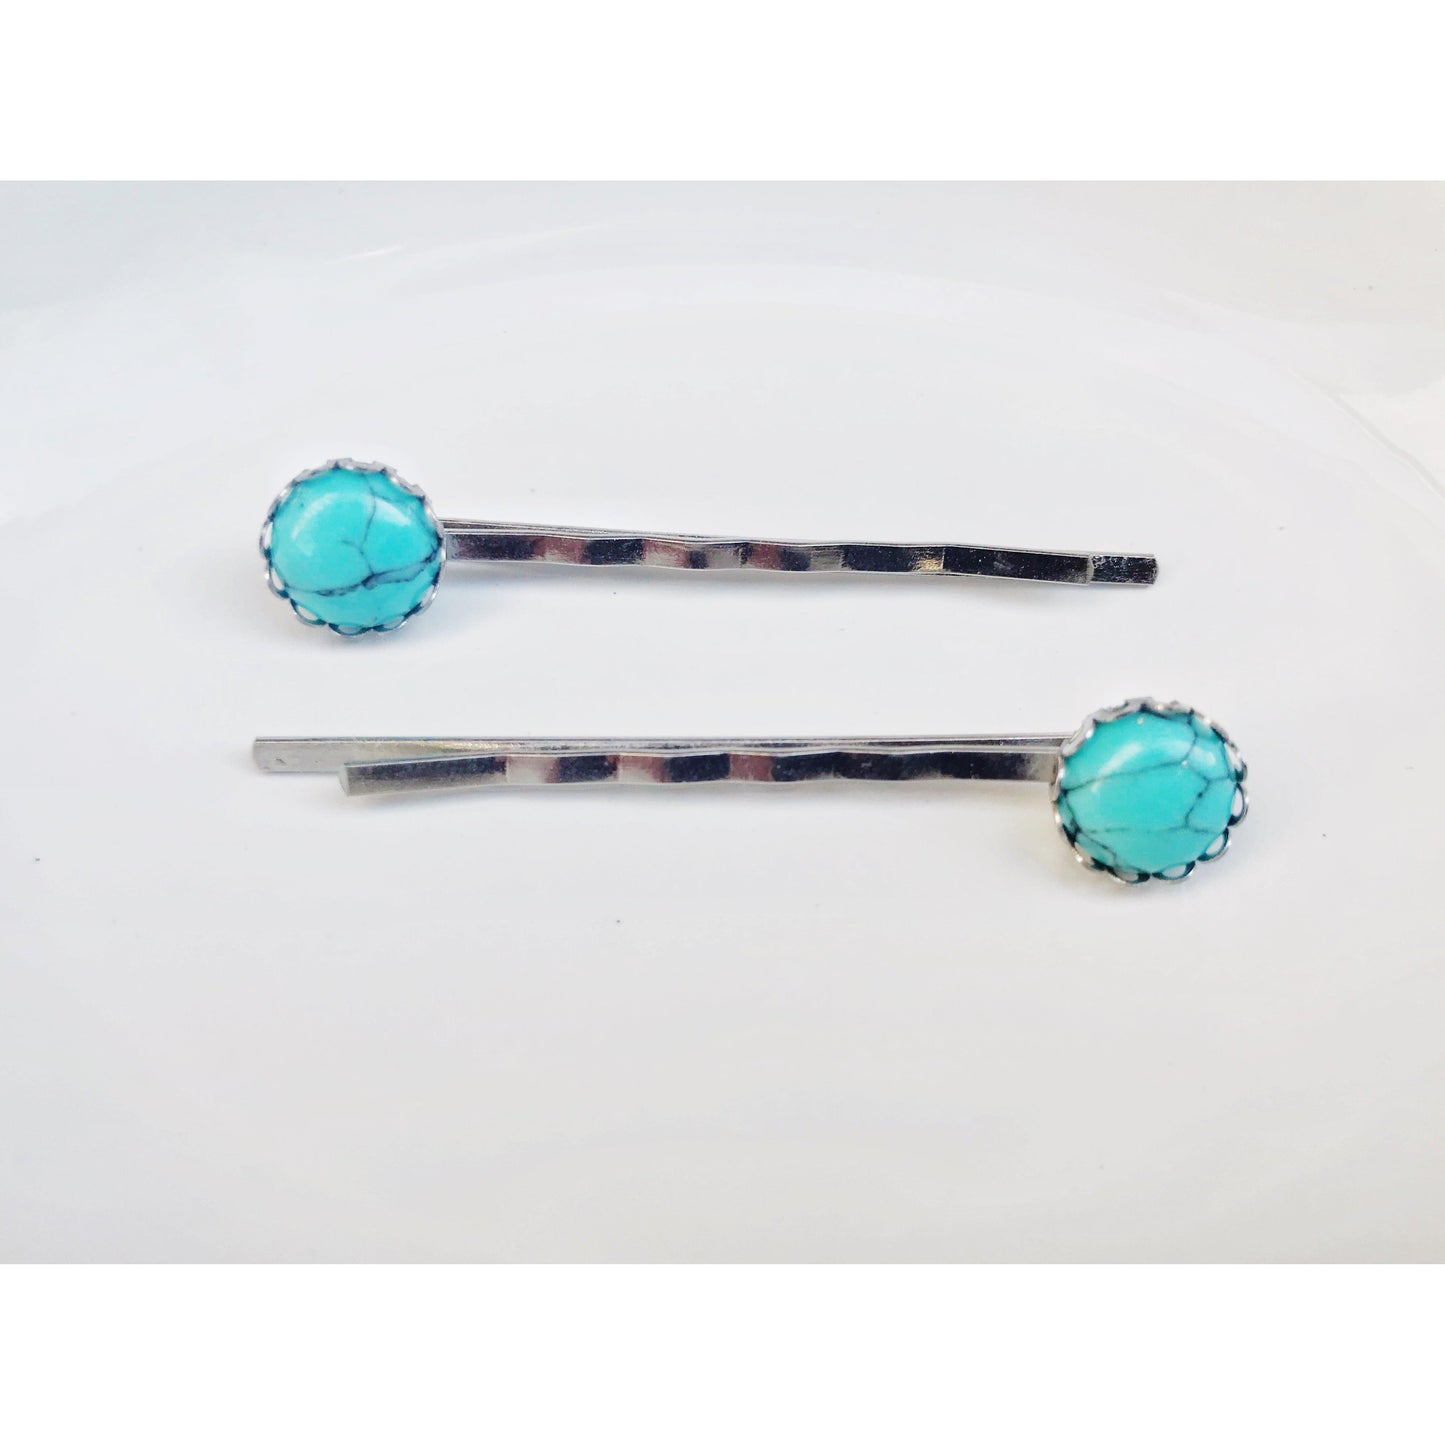 Turquoise Hair Pins - Western Silver Bobby Pins Women's Southwestern Hair Accessories